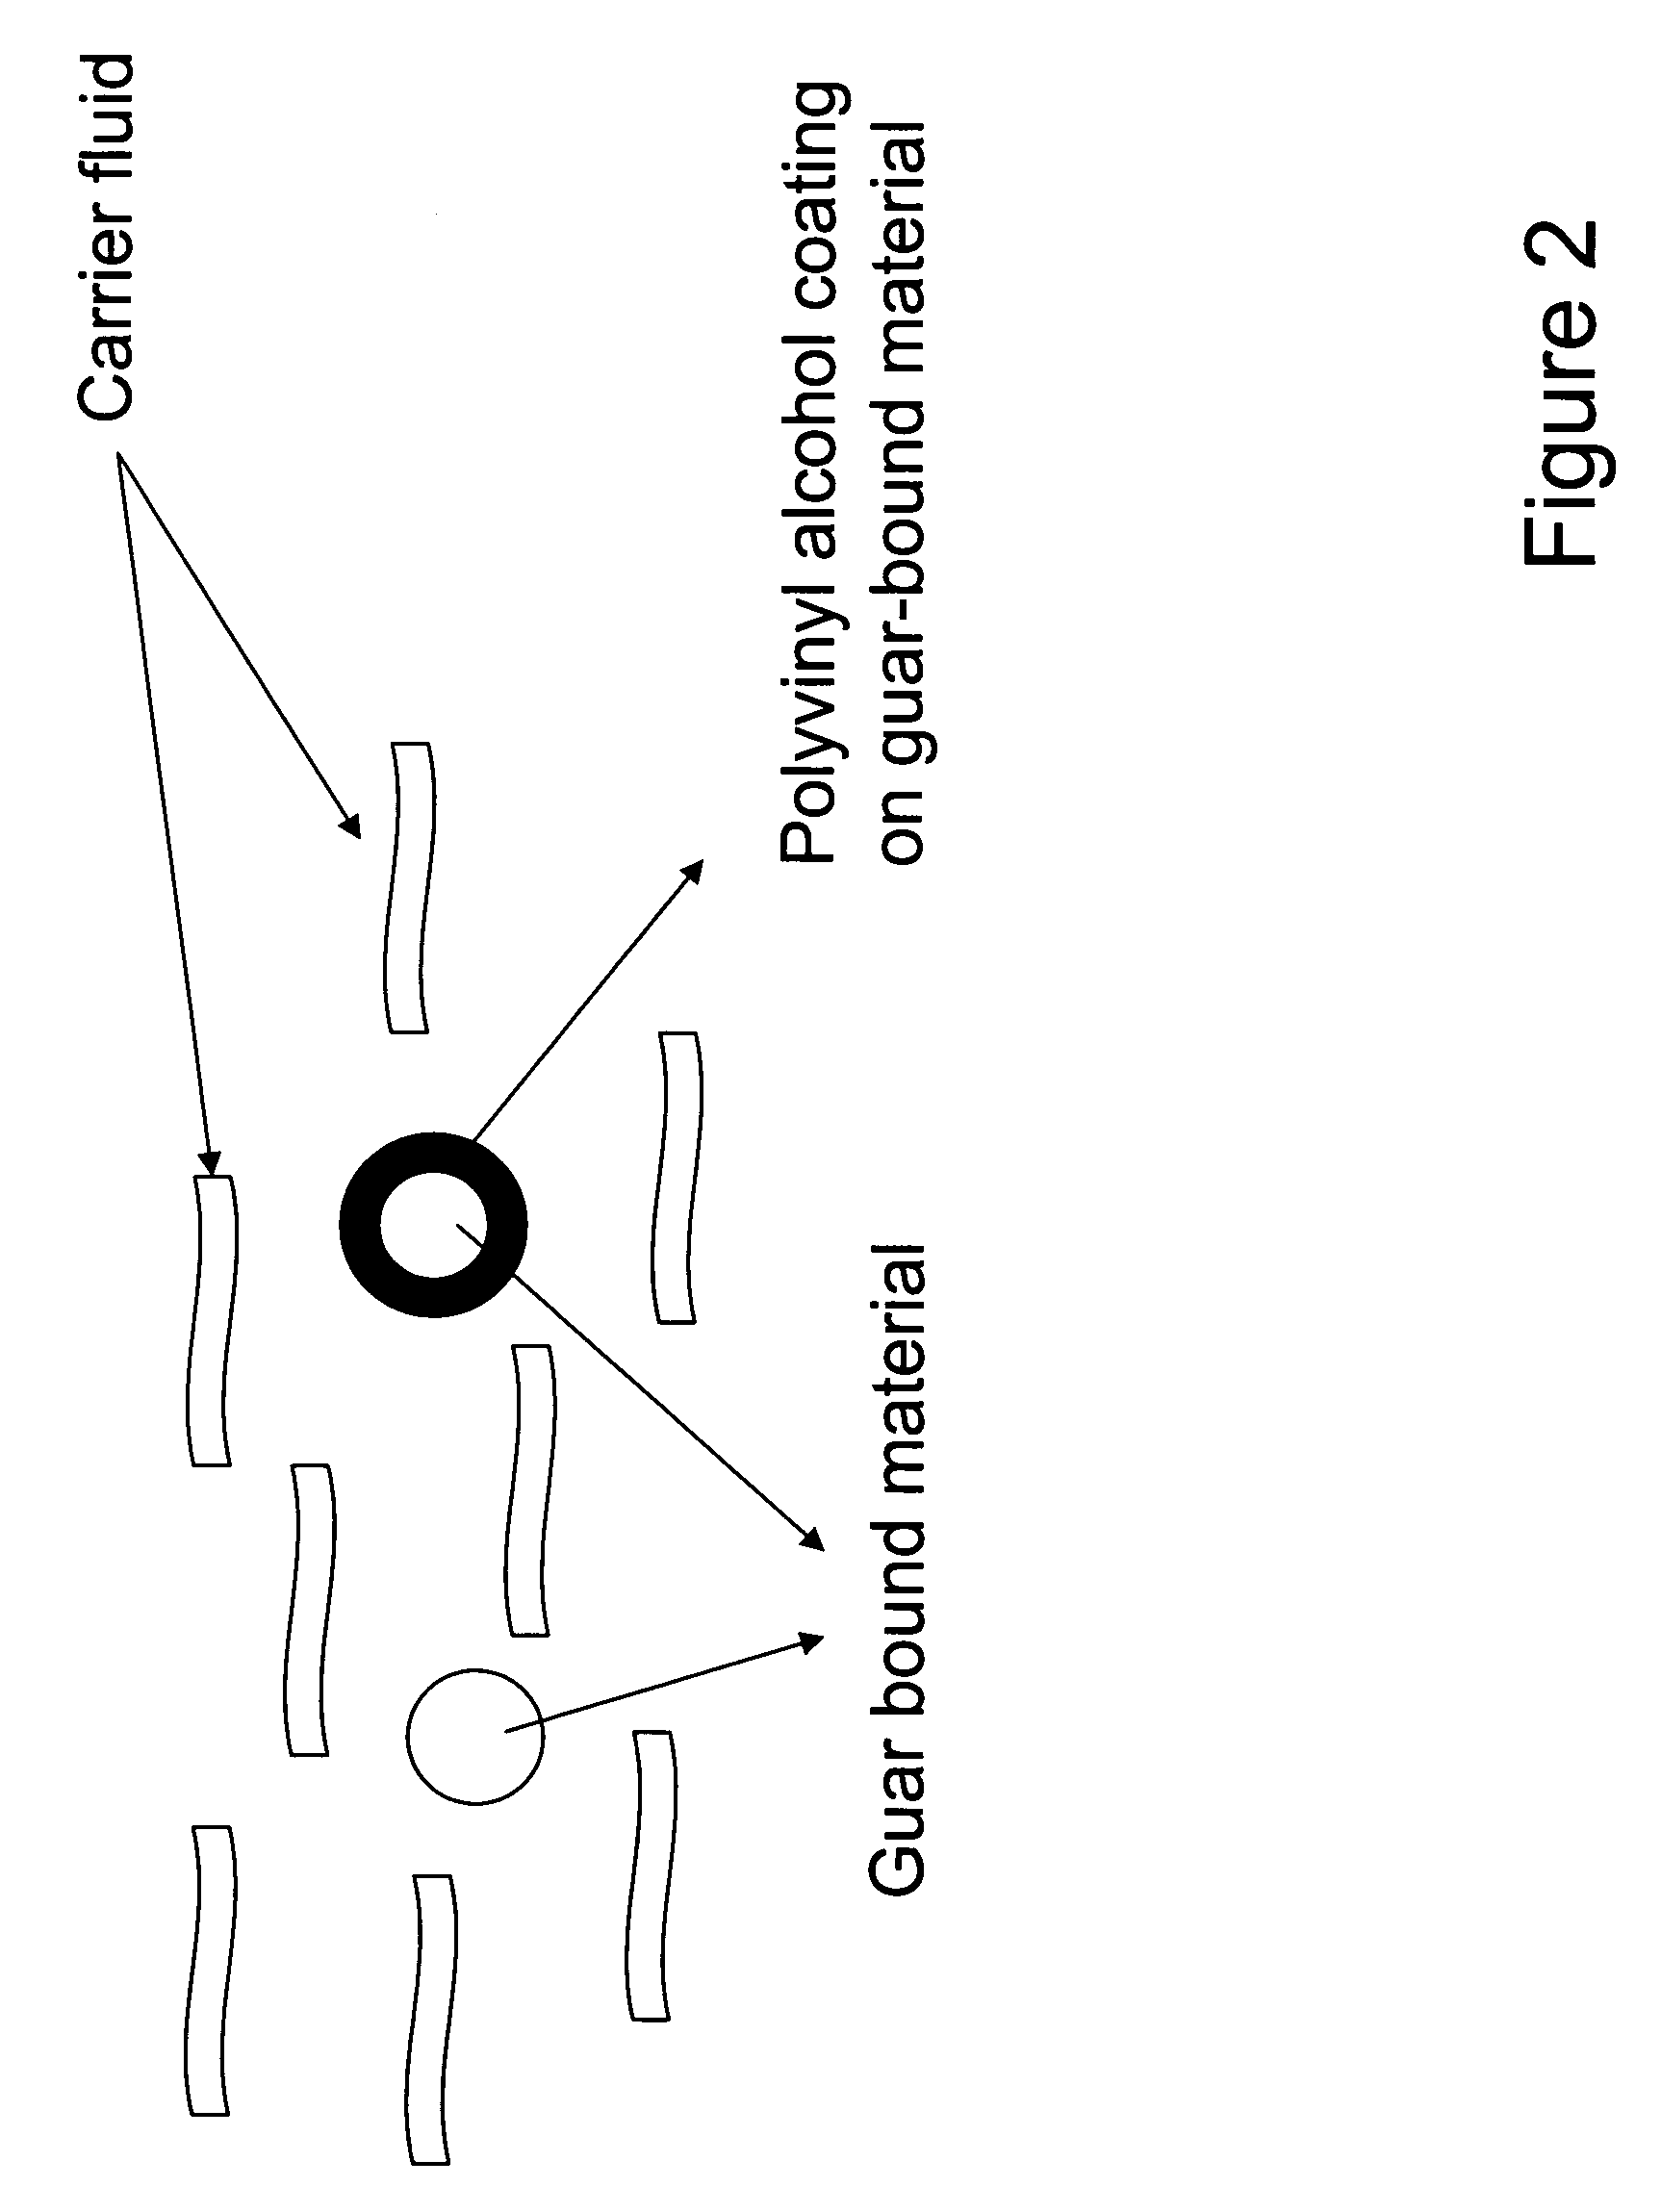 Methods and compositions for thermally treating a conduit used for hydrocarbon production or transmission to help remove paraffin wax buildup